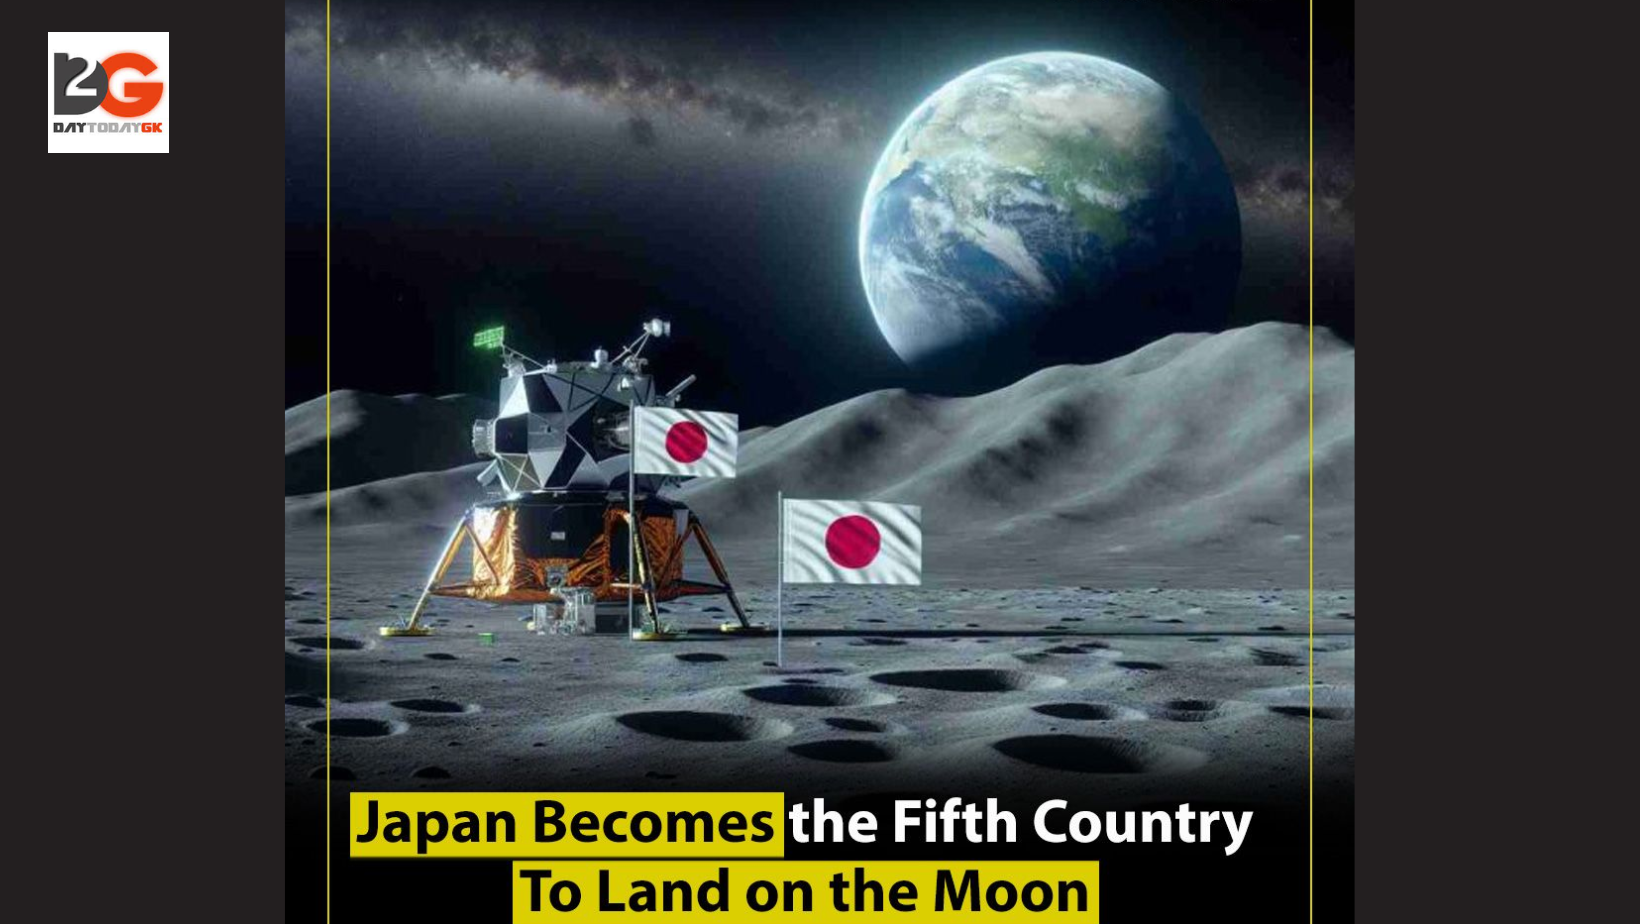 Japan Becomes Fifth Country To Land On The Moon Successfully